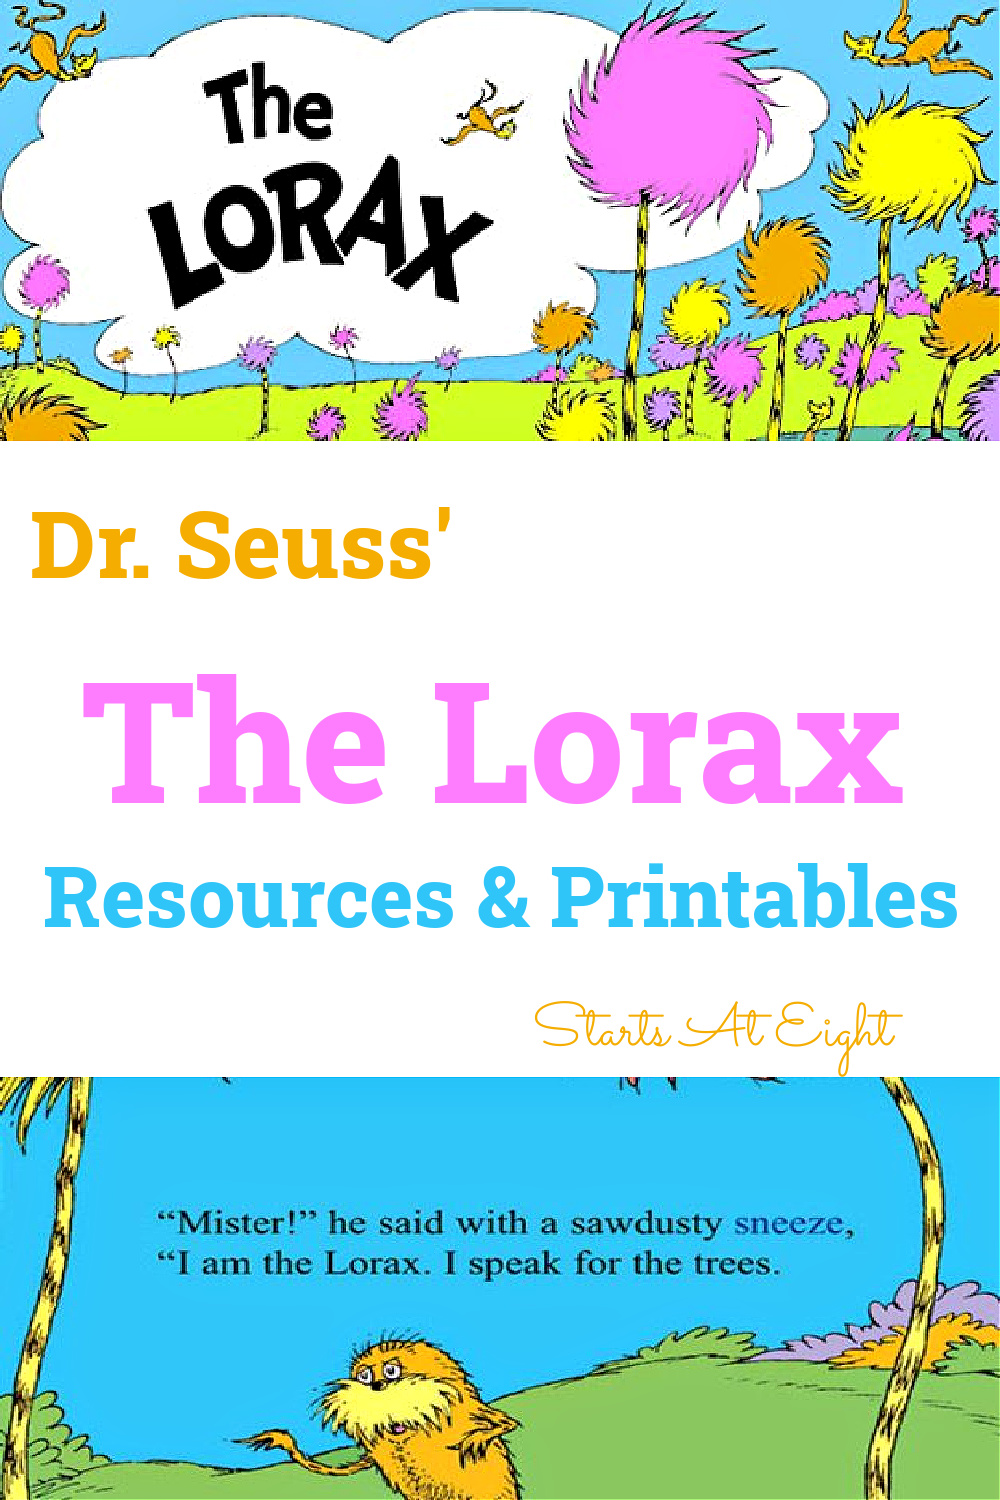 Dr seuss the lorax resources printables